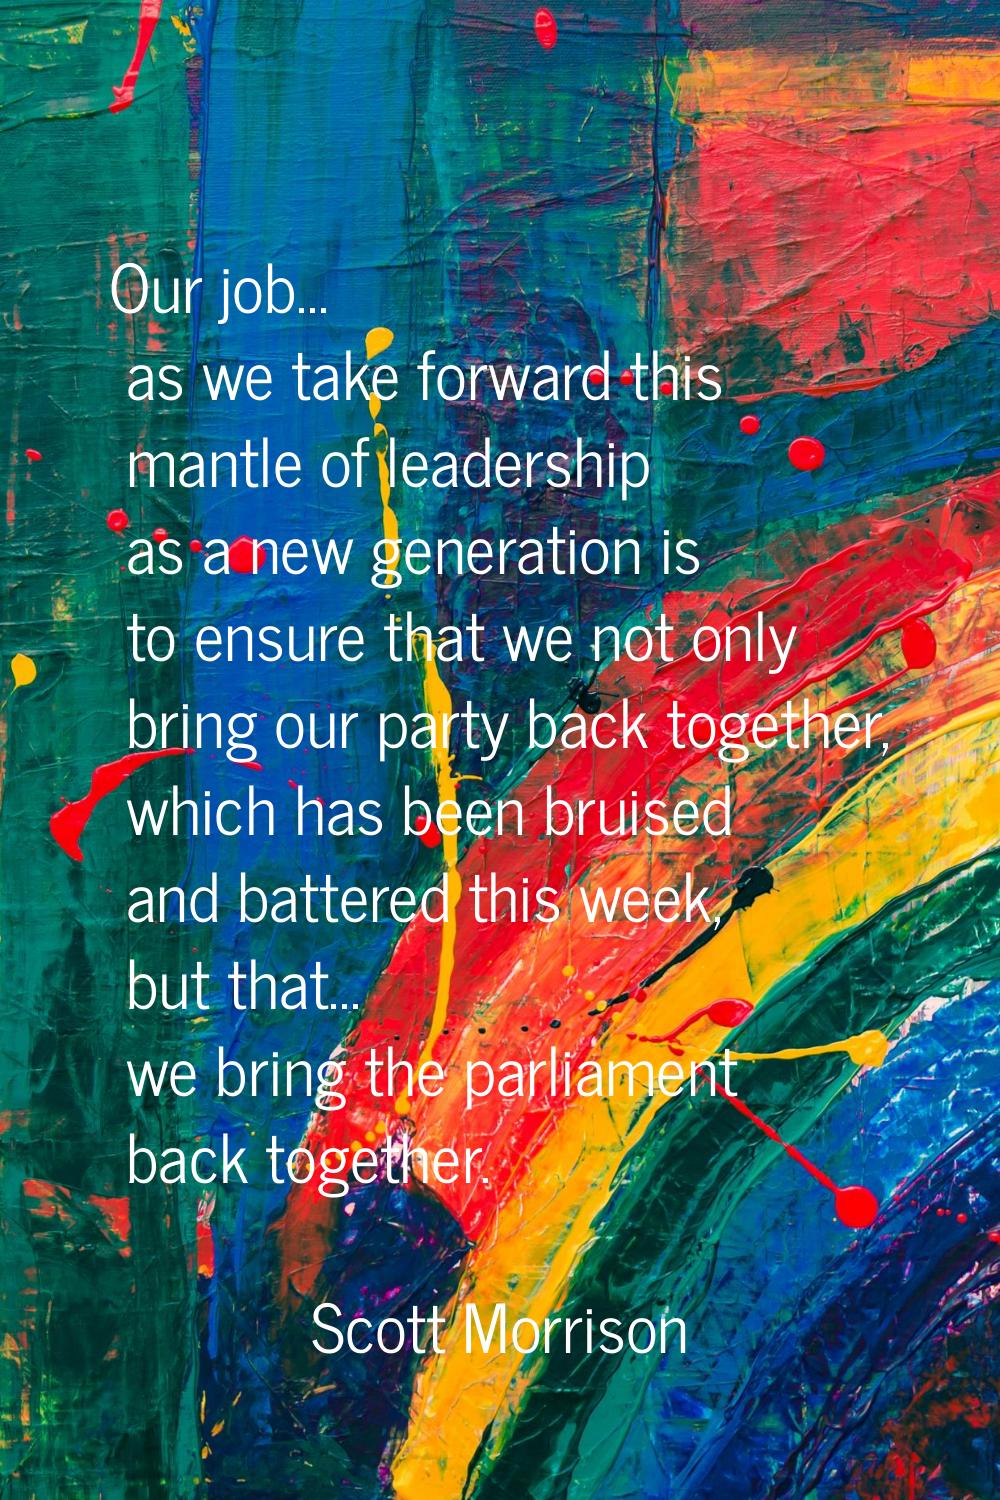 Our job... as we take forward this mantle of leadership as a new generation is to ensure that we no